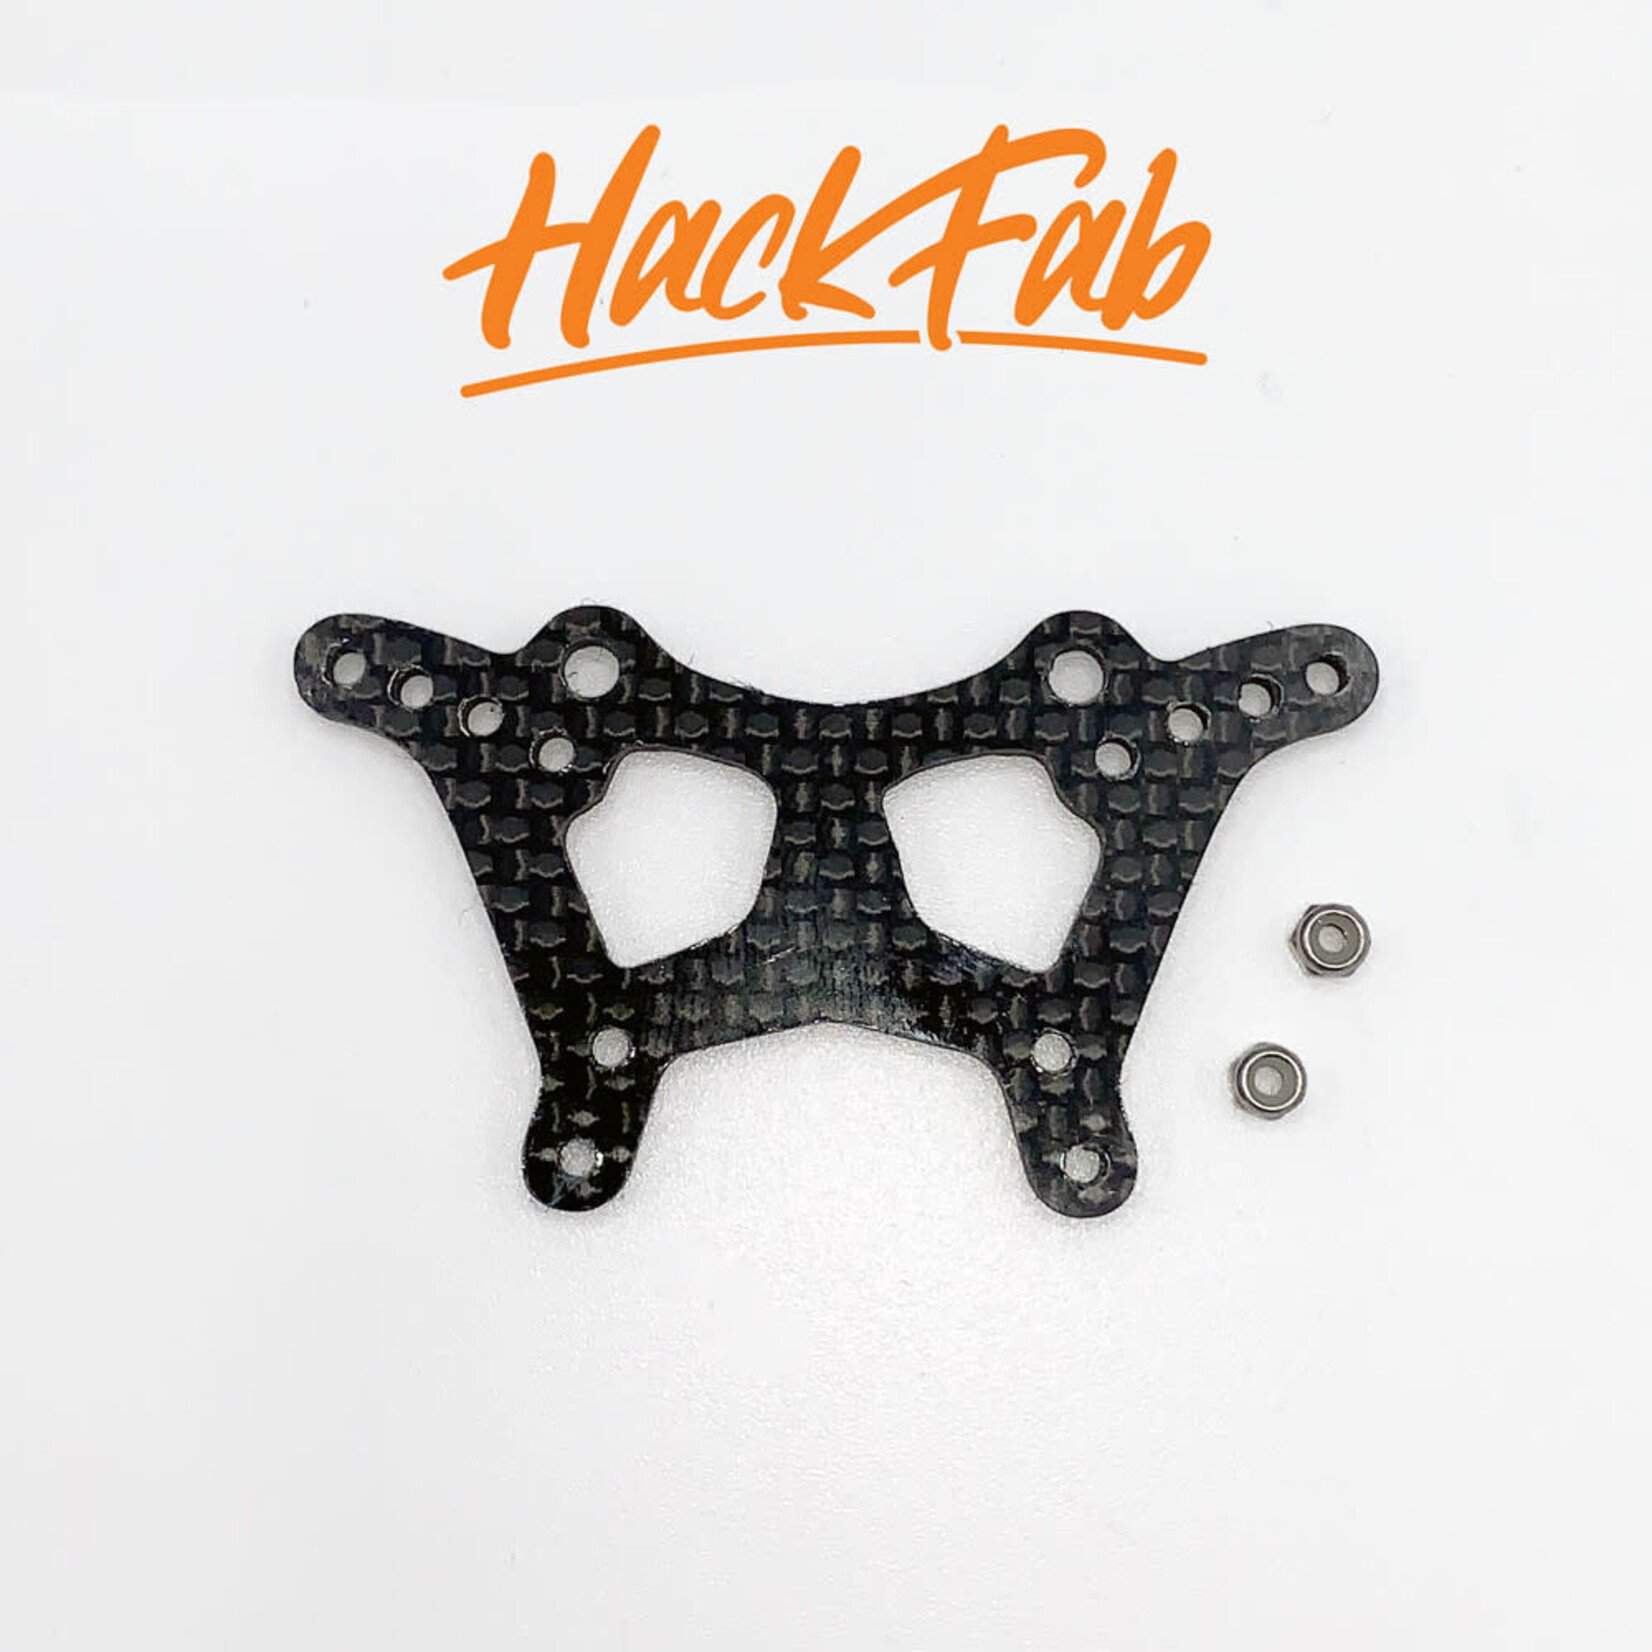 Hack Fab Losi Mini-T 2.0 Carbon Fiber WIDE front shock tower